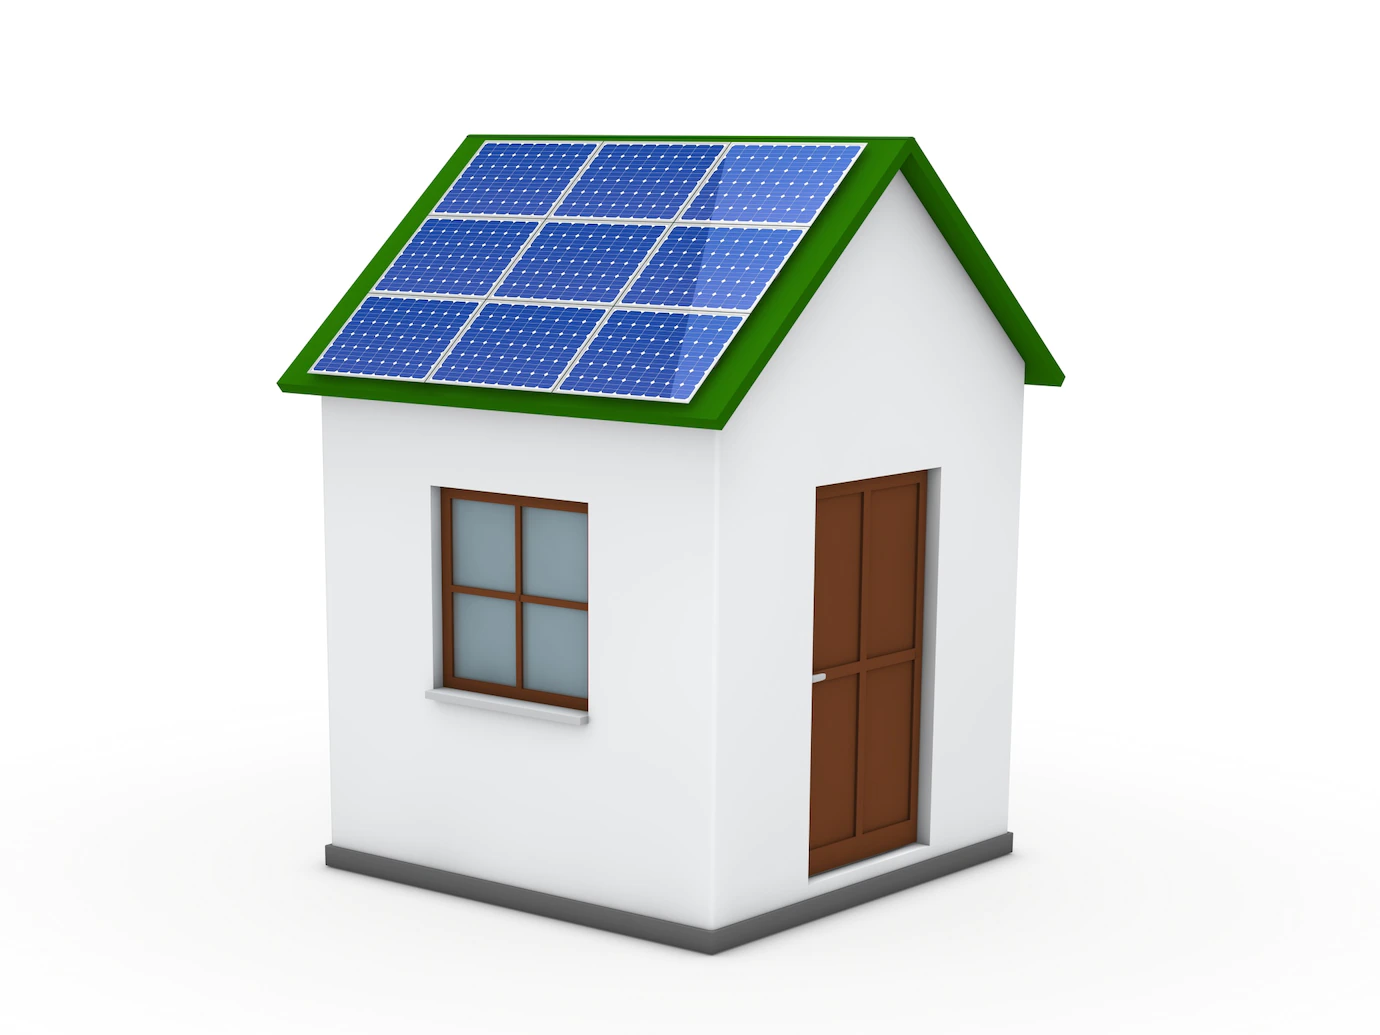 House With Solar Panel Roof 1156 644